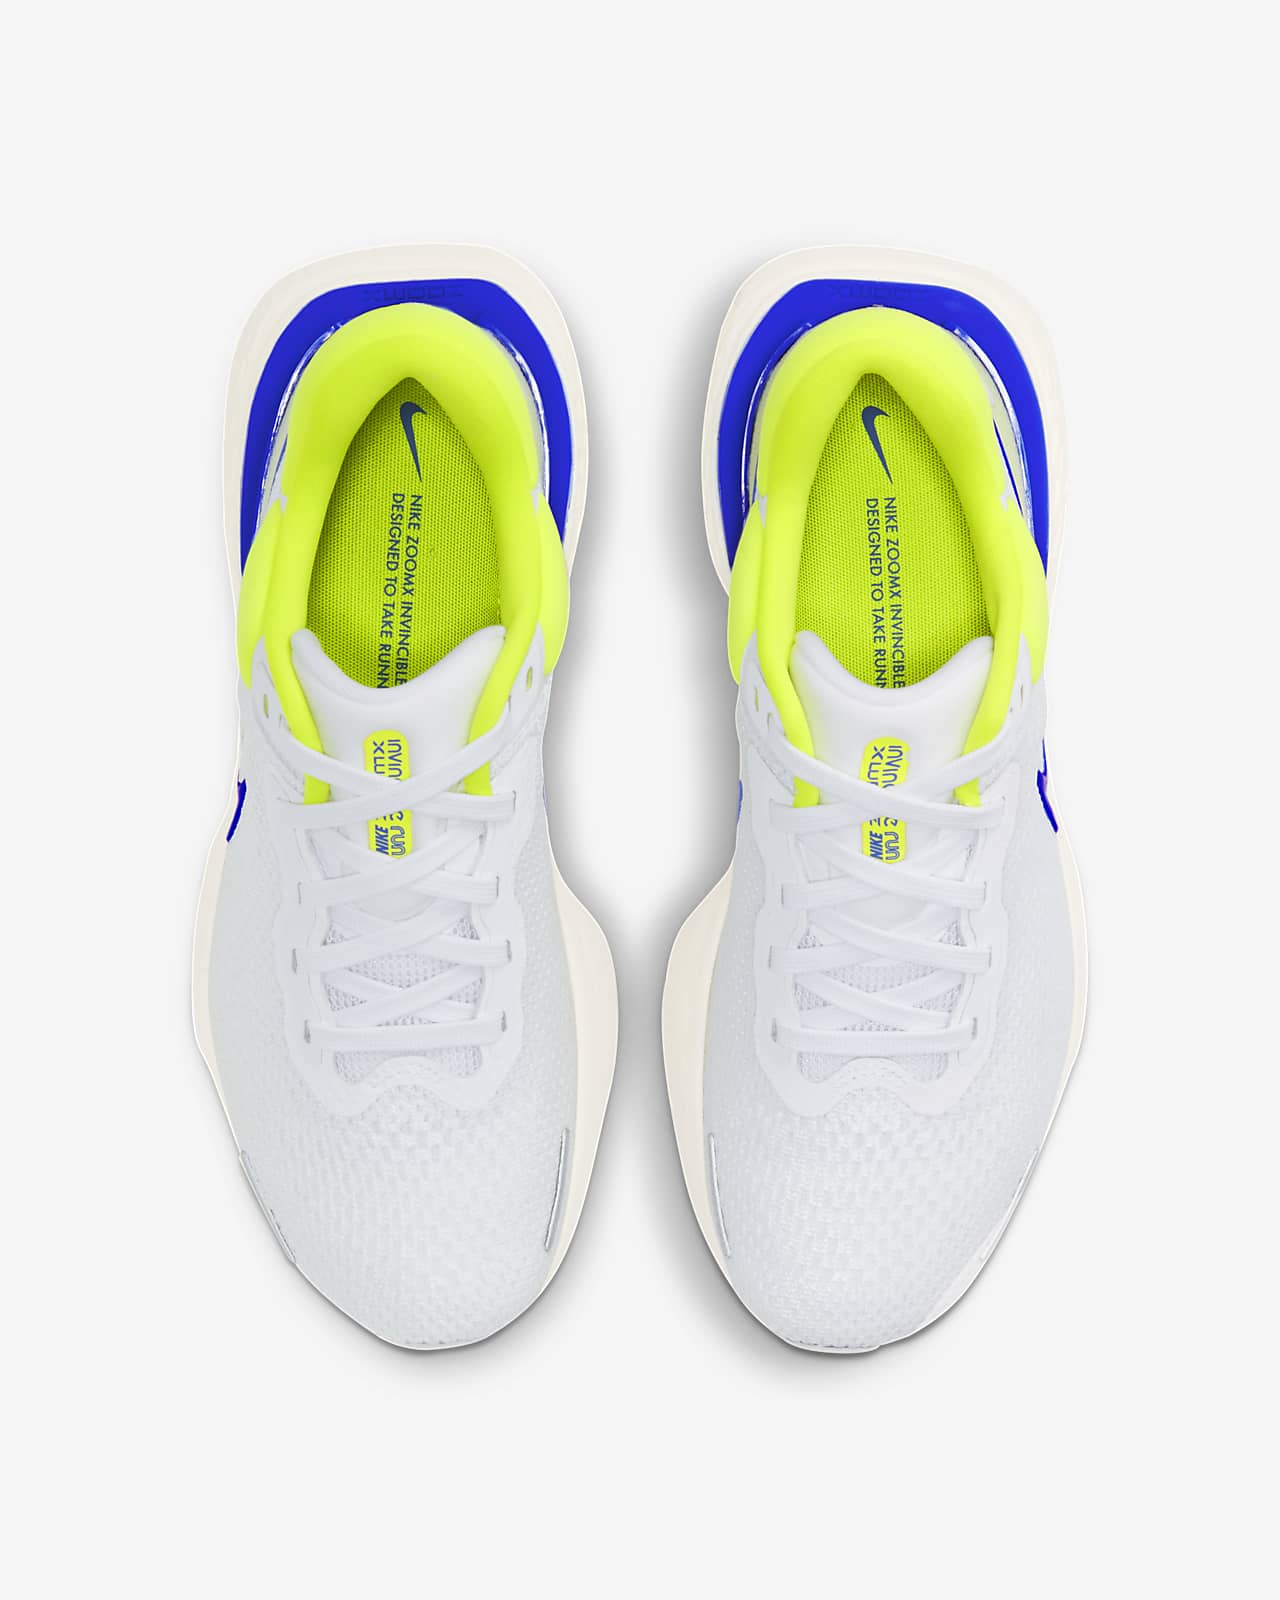 nike zoomx mens